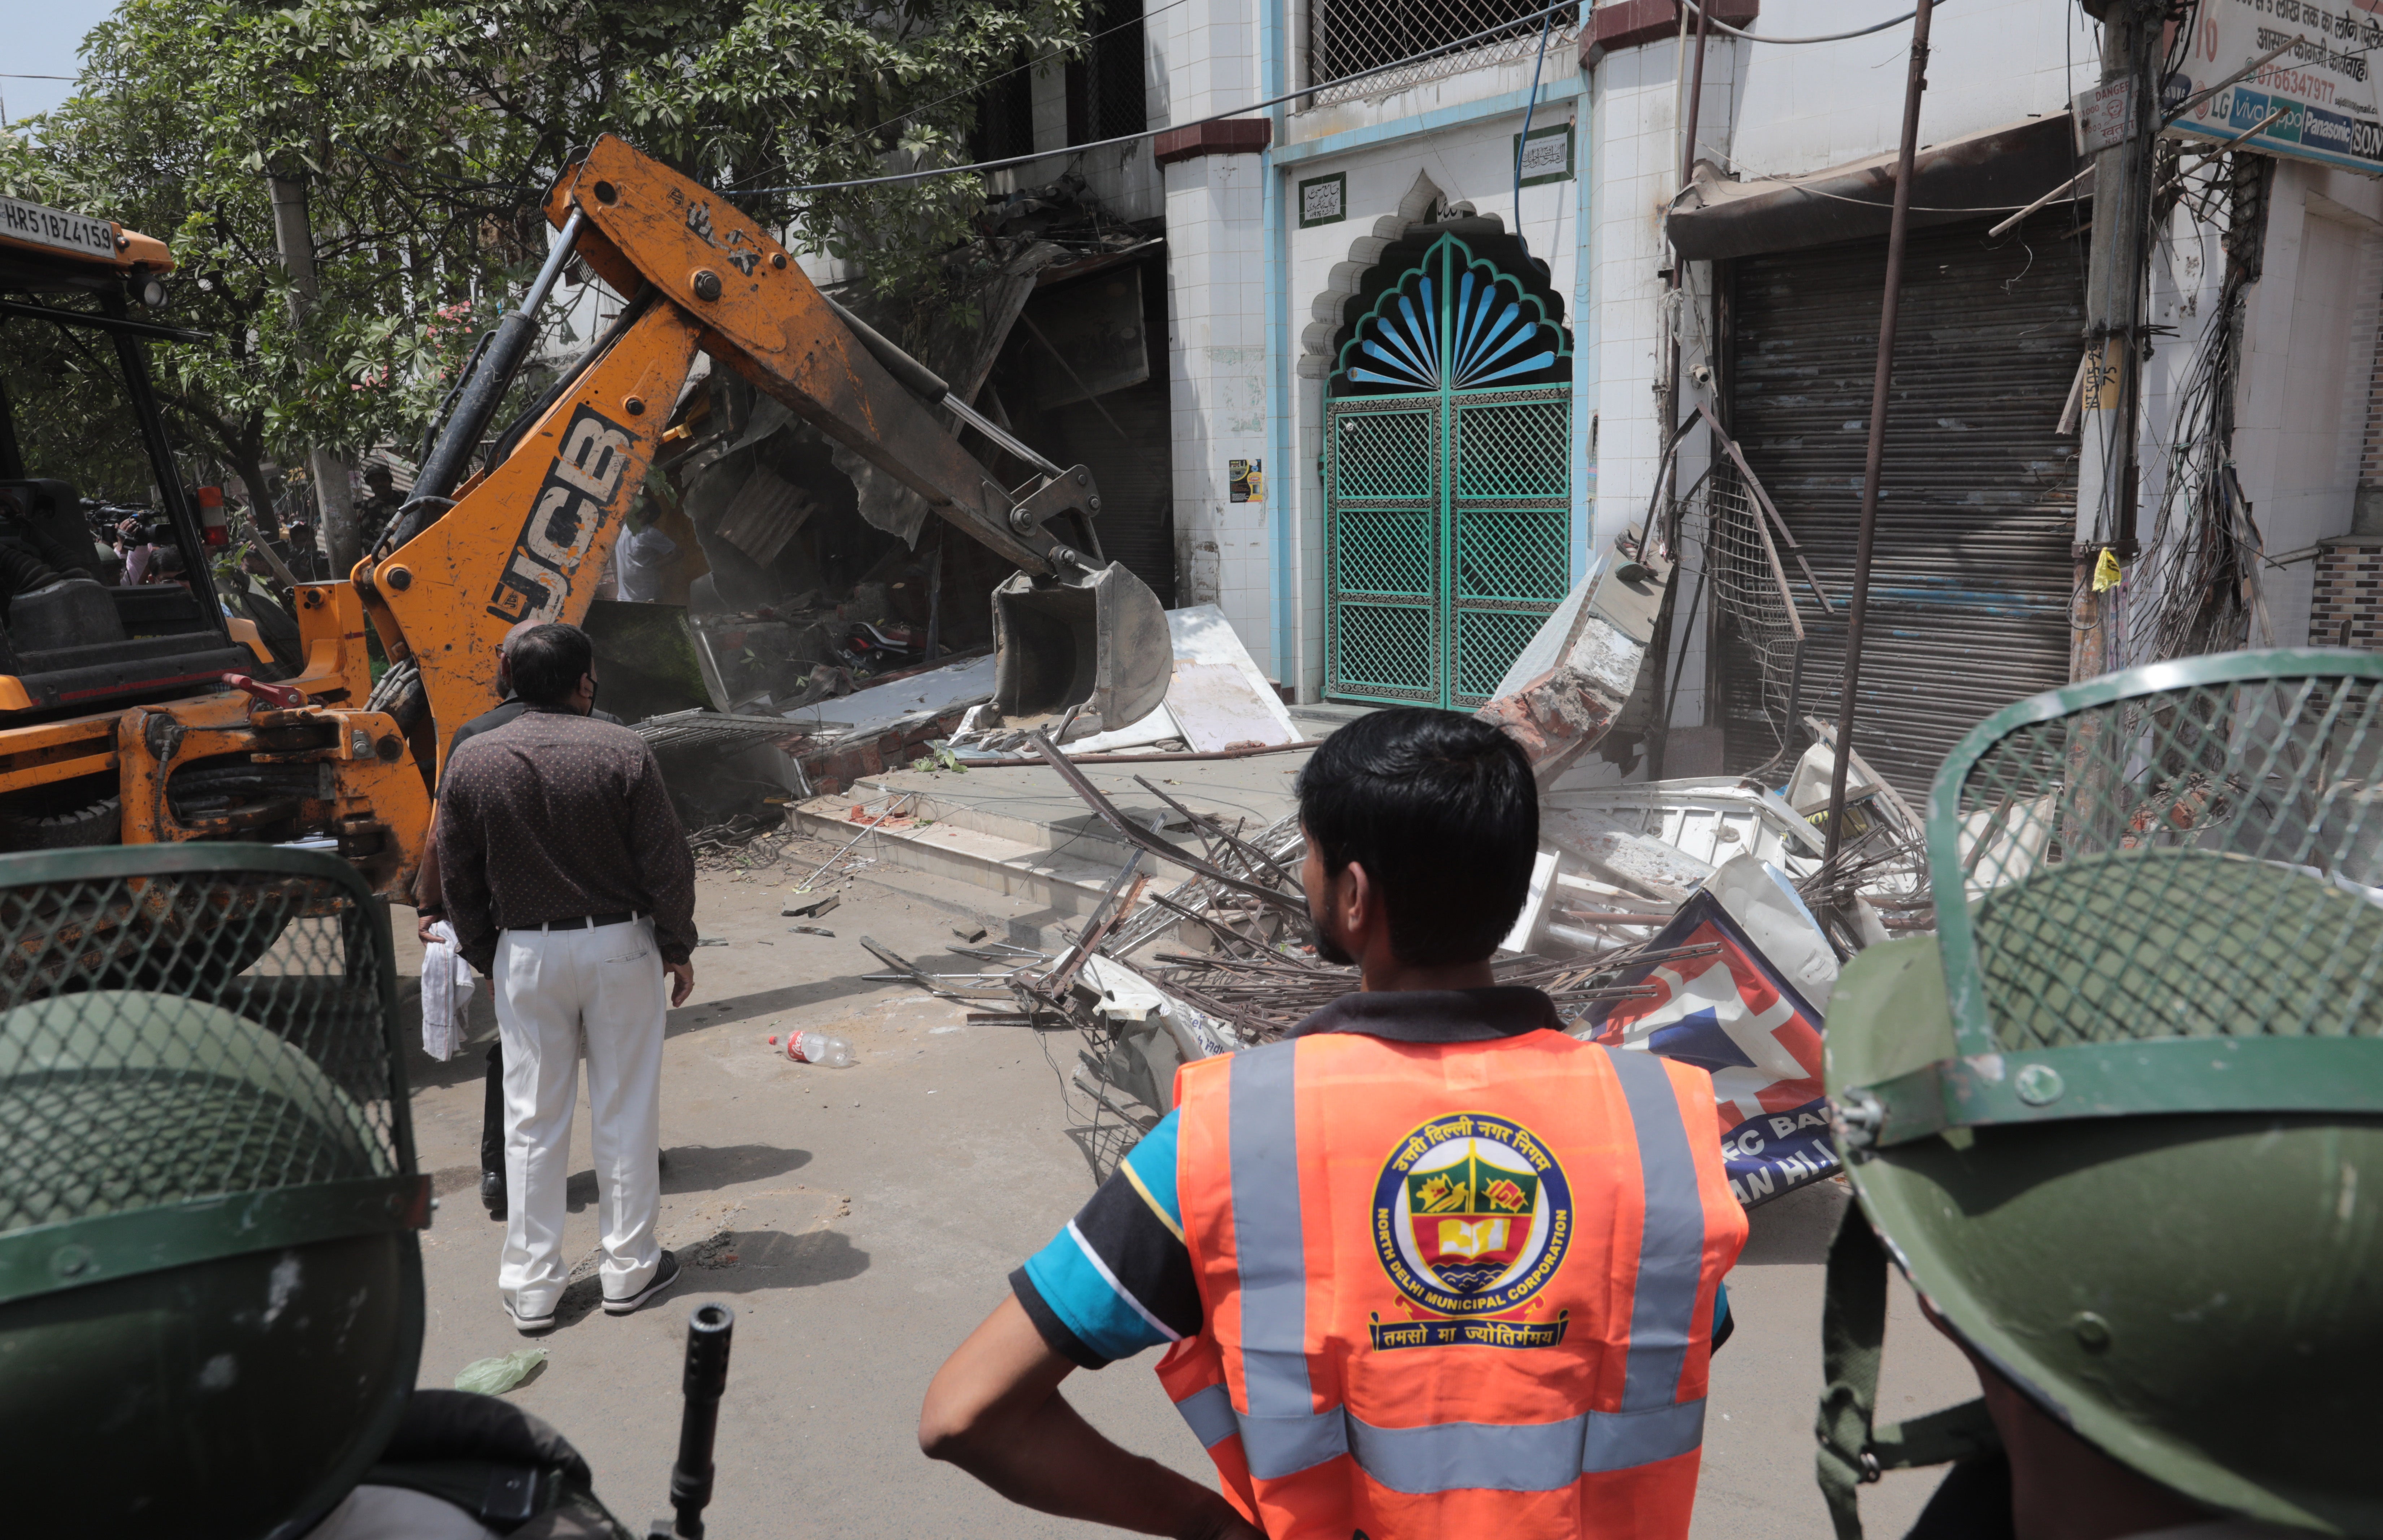 A bulldozer dismantles structures outside a mosque during the demolition drive of illegal structures in Delhi's violence-hit Jahangirpuri